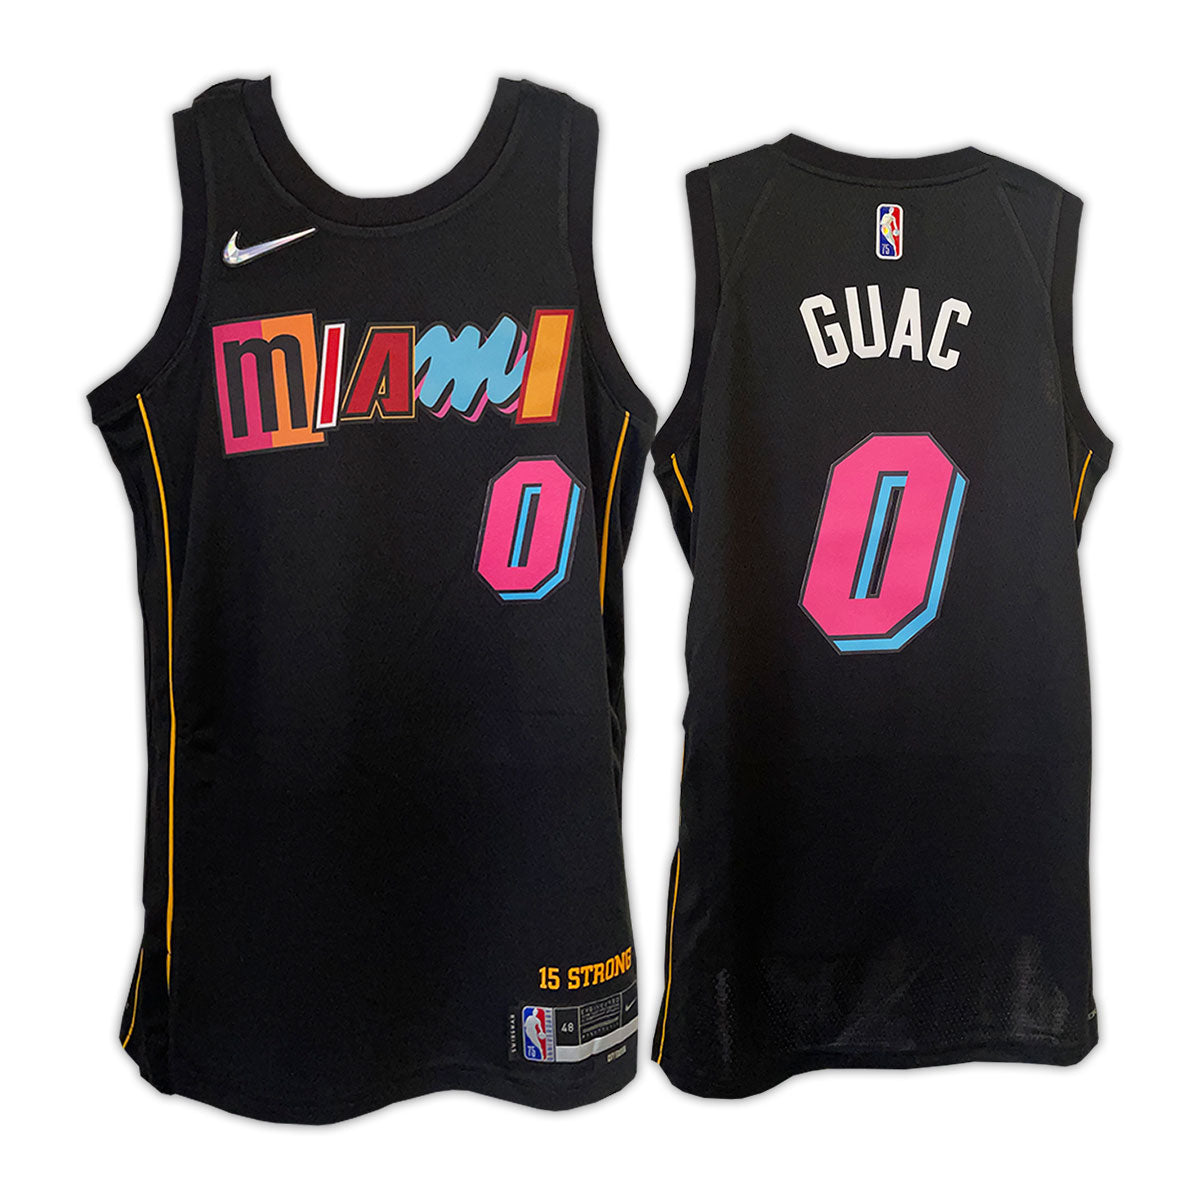 ONE OF A KIND NBA OFFICIAL GUAC #0 NIKE MIAMI HEAT VICEVERSA